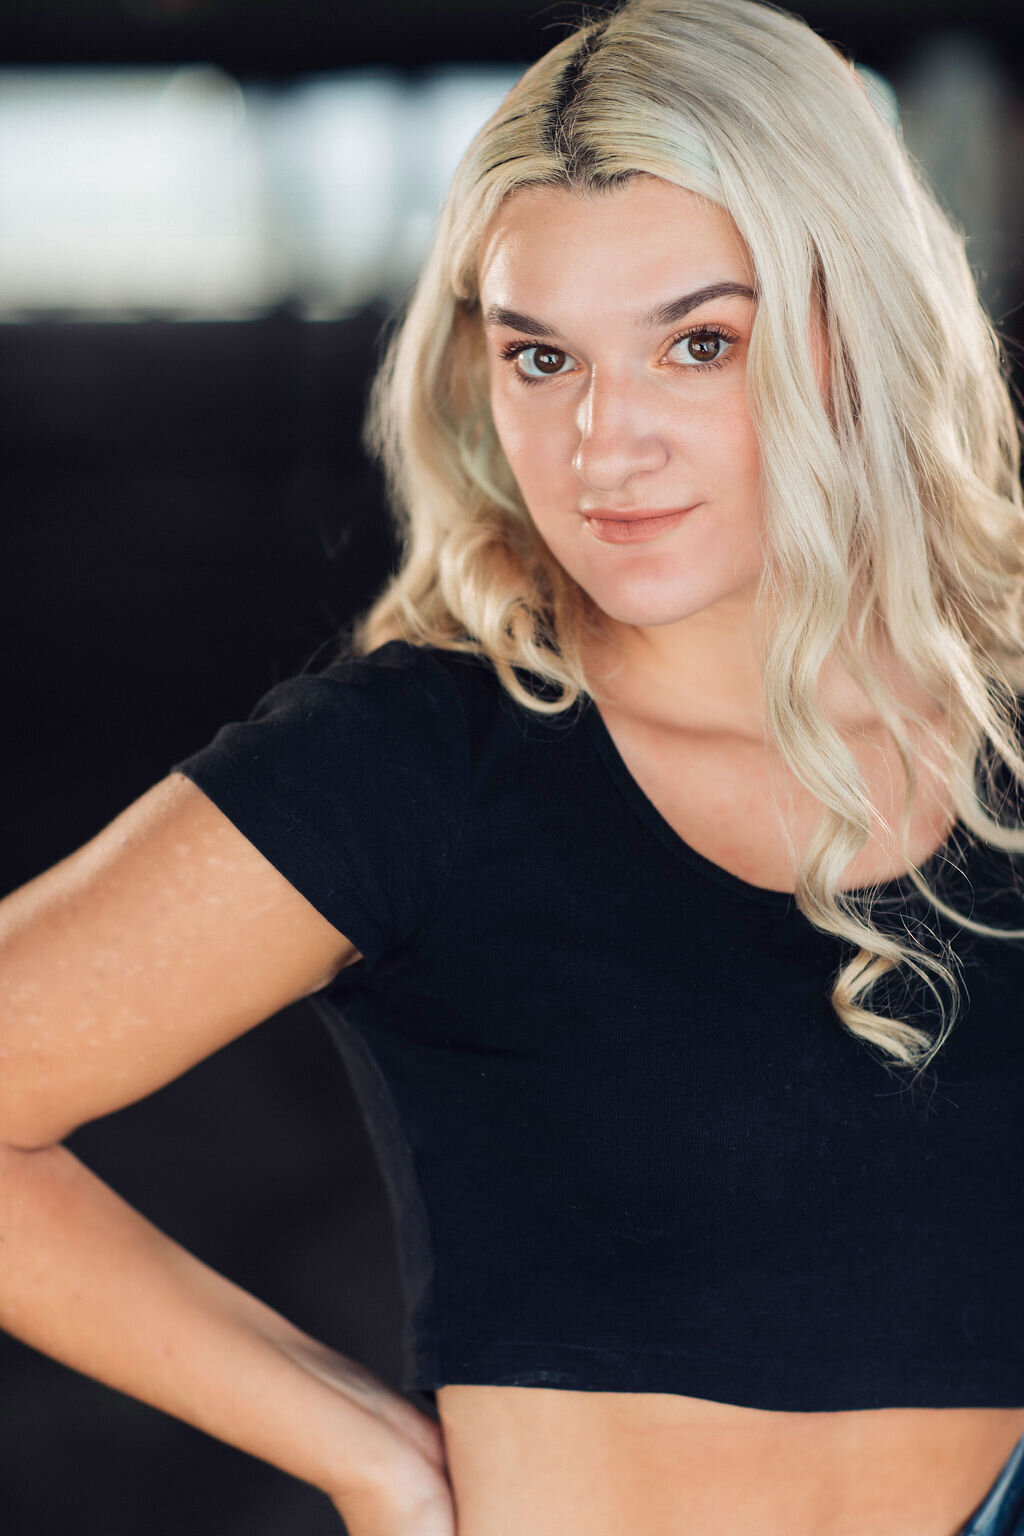 Headshot Photograph Of Young Woman In Black Crop Top Los Angeles